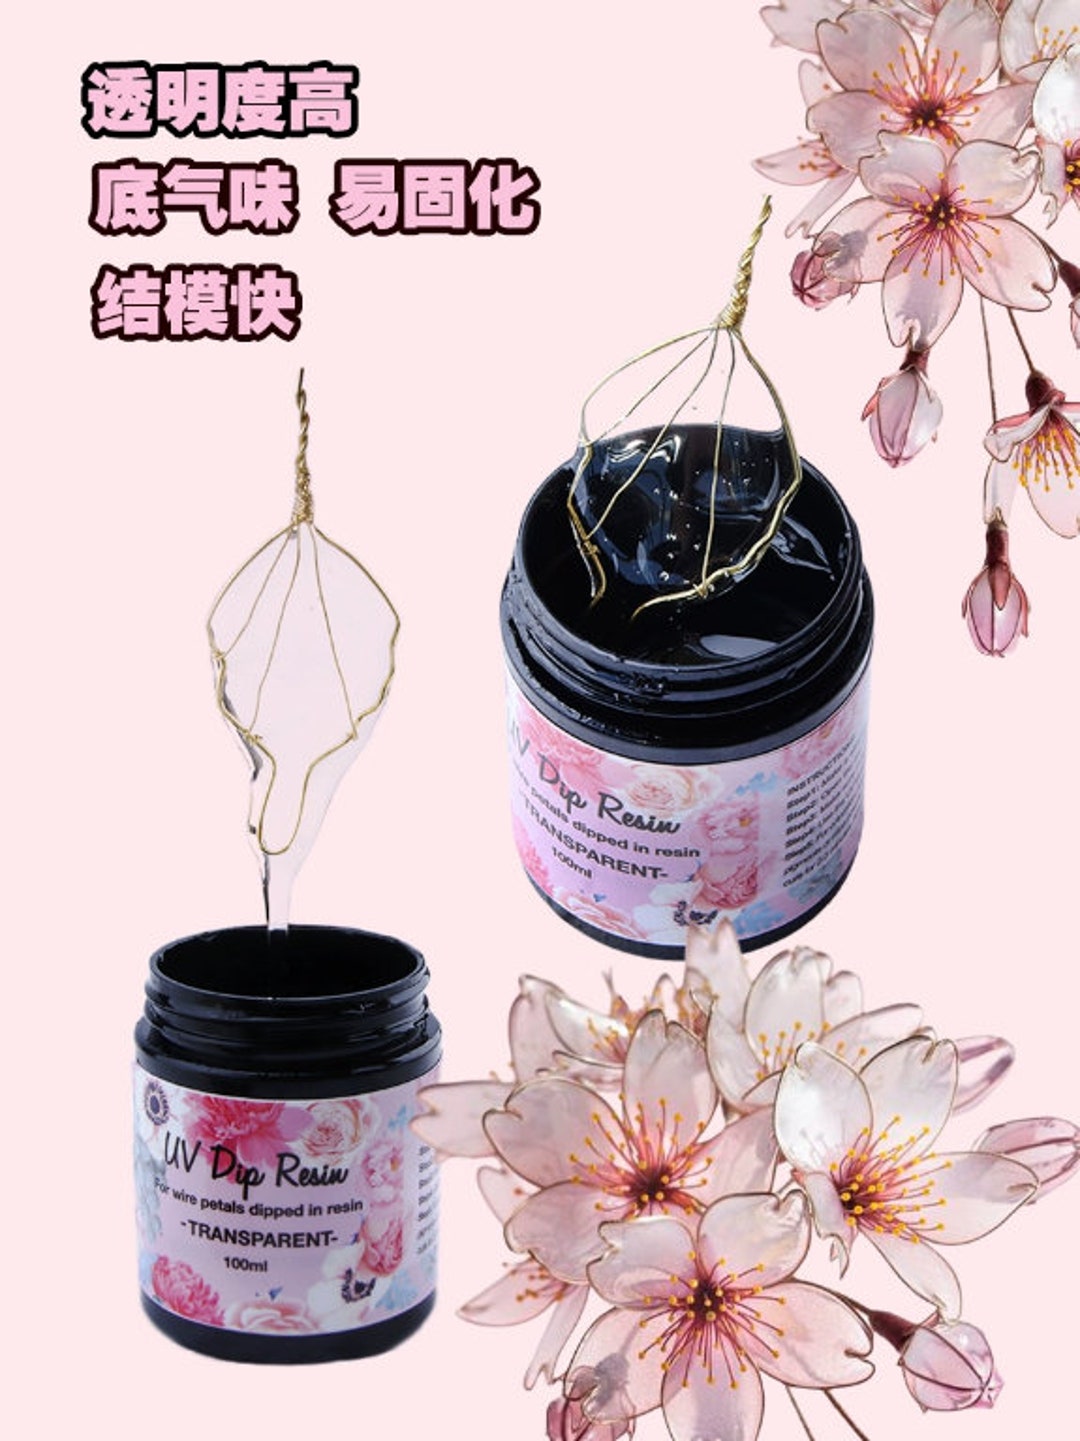 UV DIP RESIN for Wire Flower Shapes and Glazing, 100ml, Transparent 